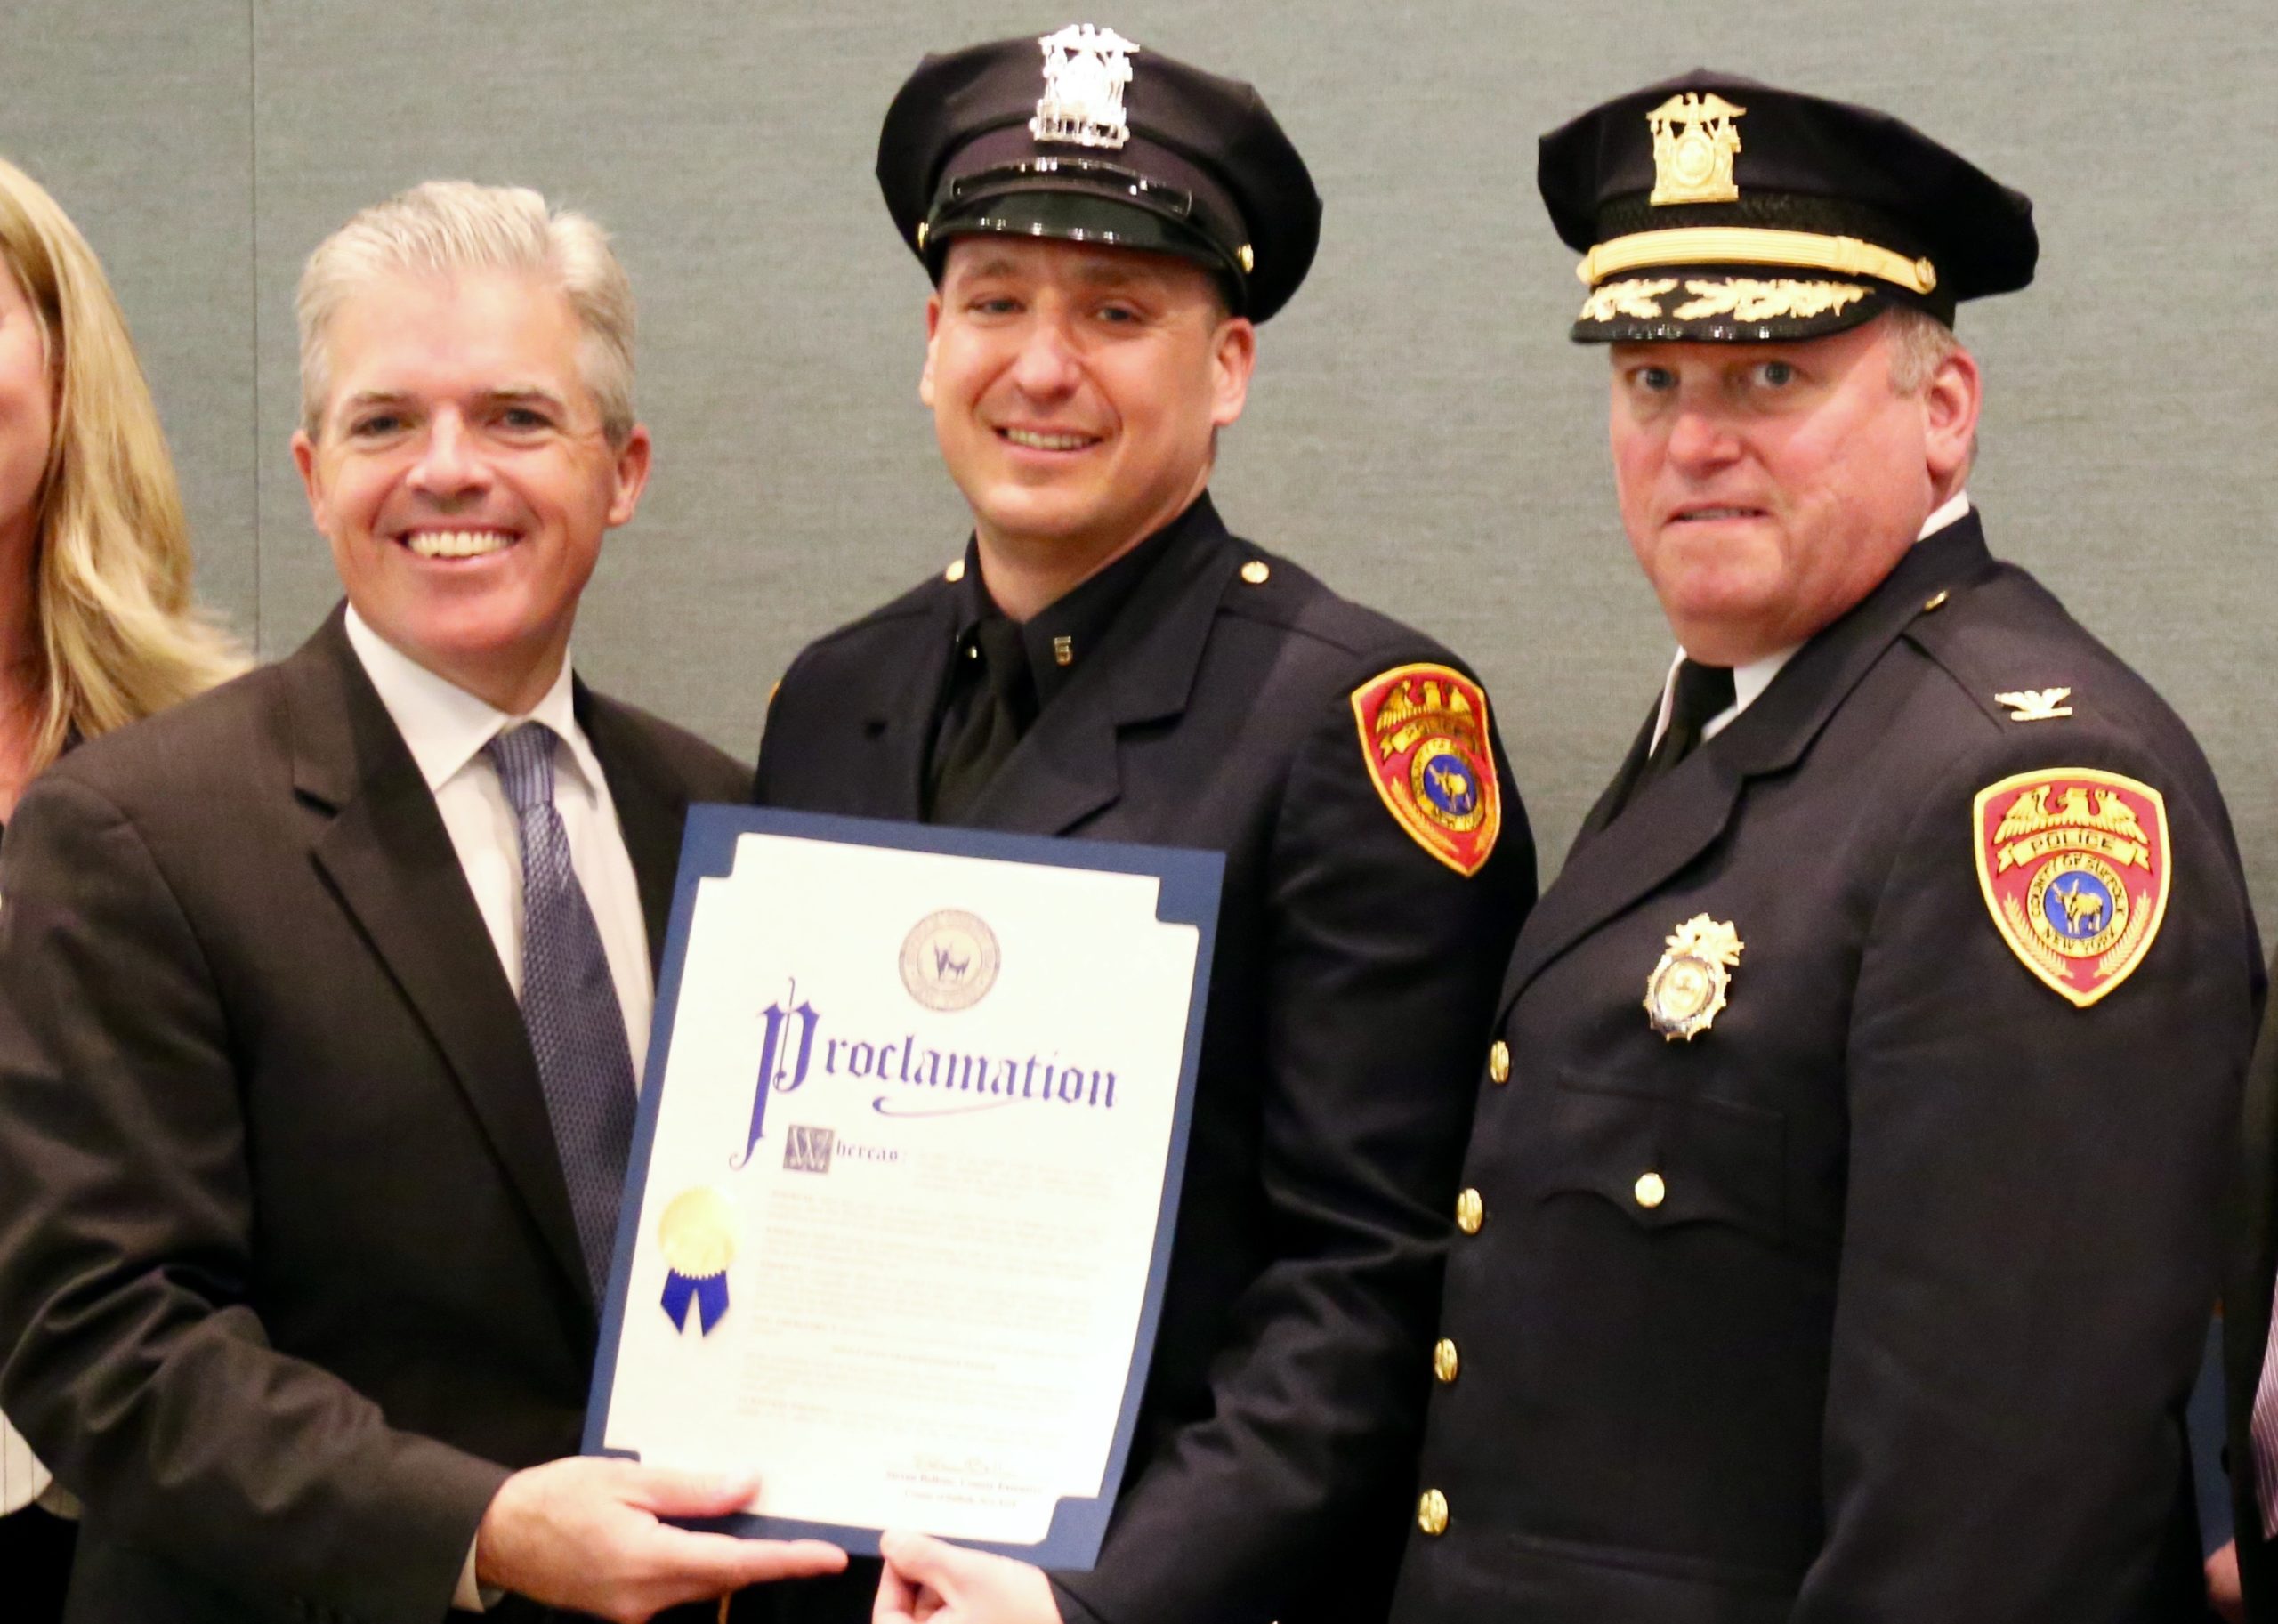 Officer Weiner of the 5th Precinct recognized for DWI arrests Greater